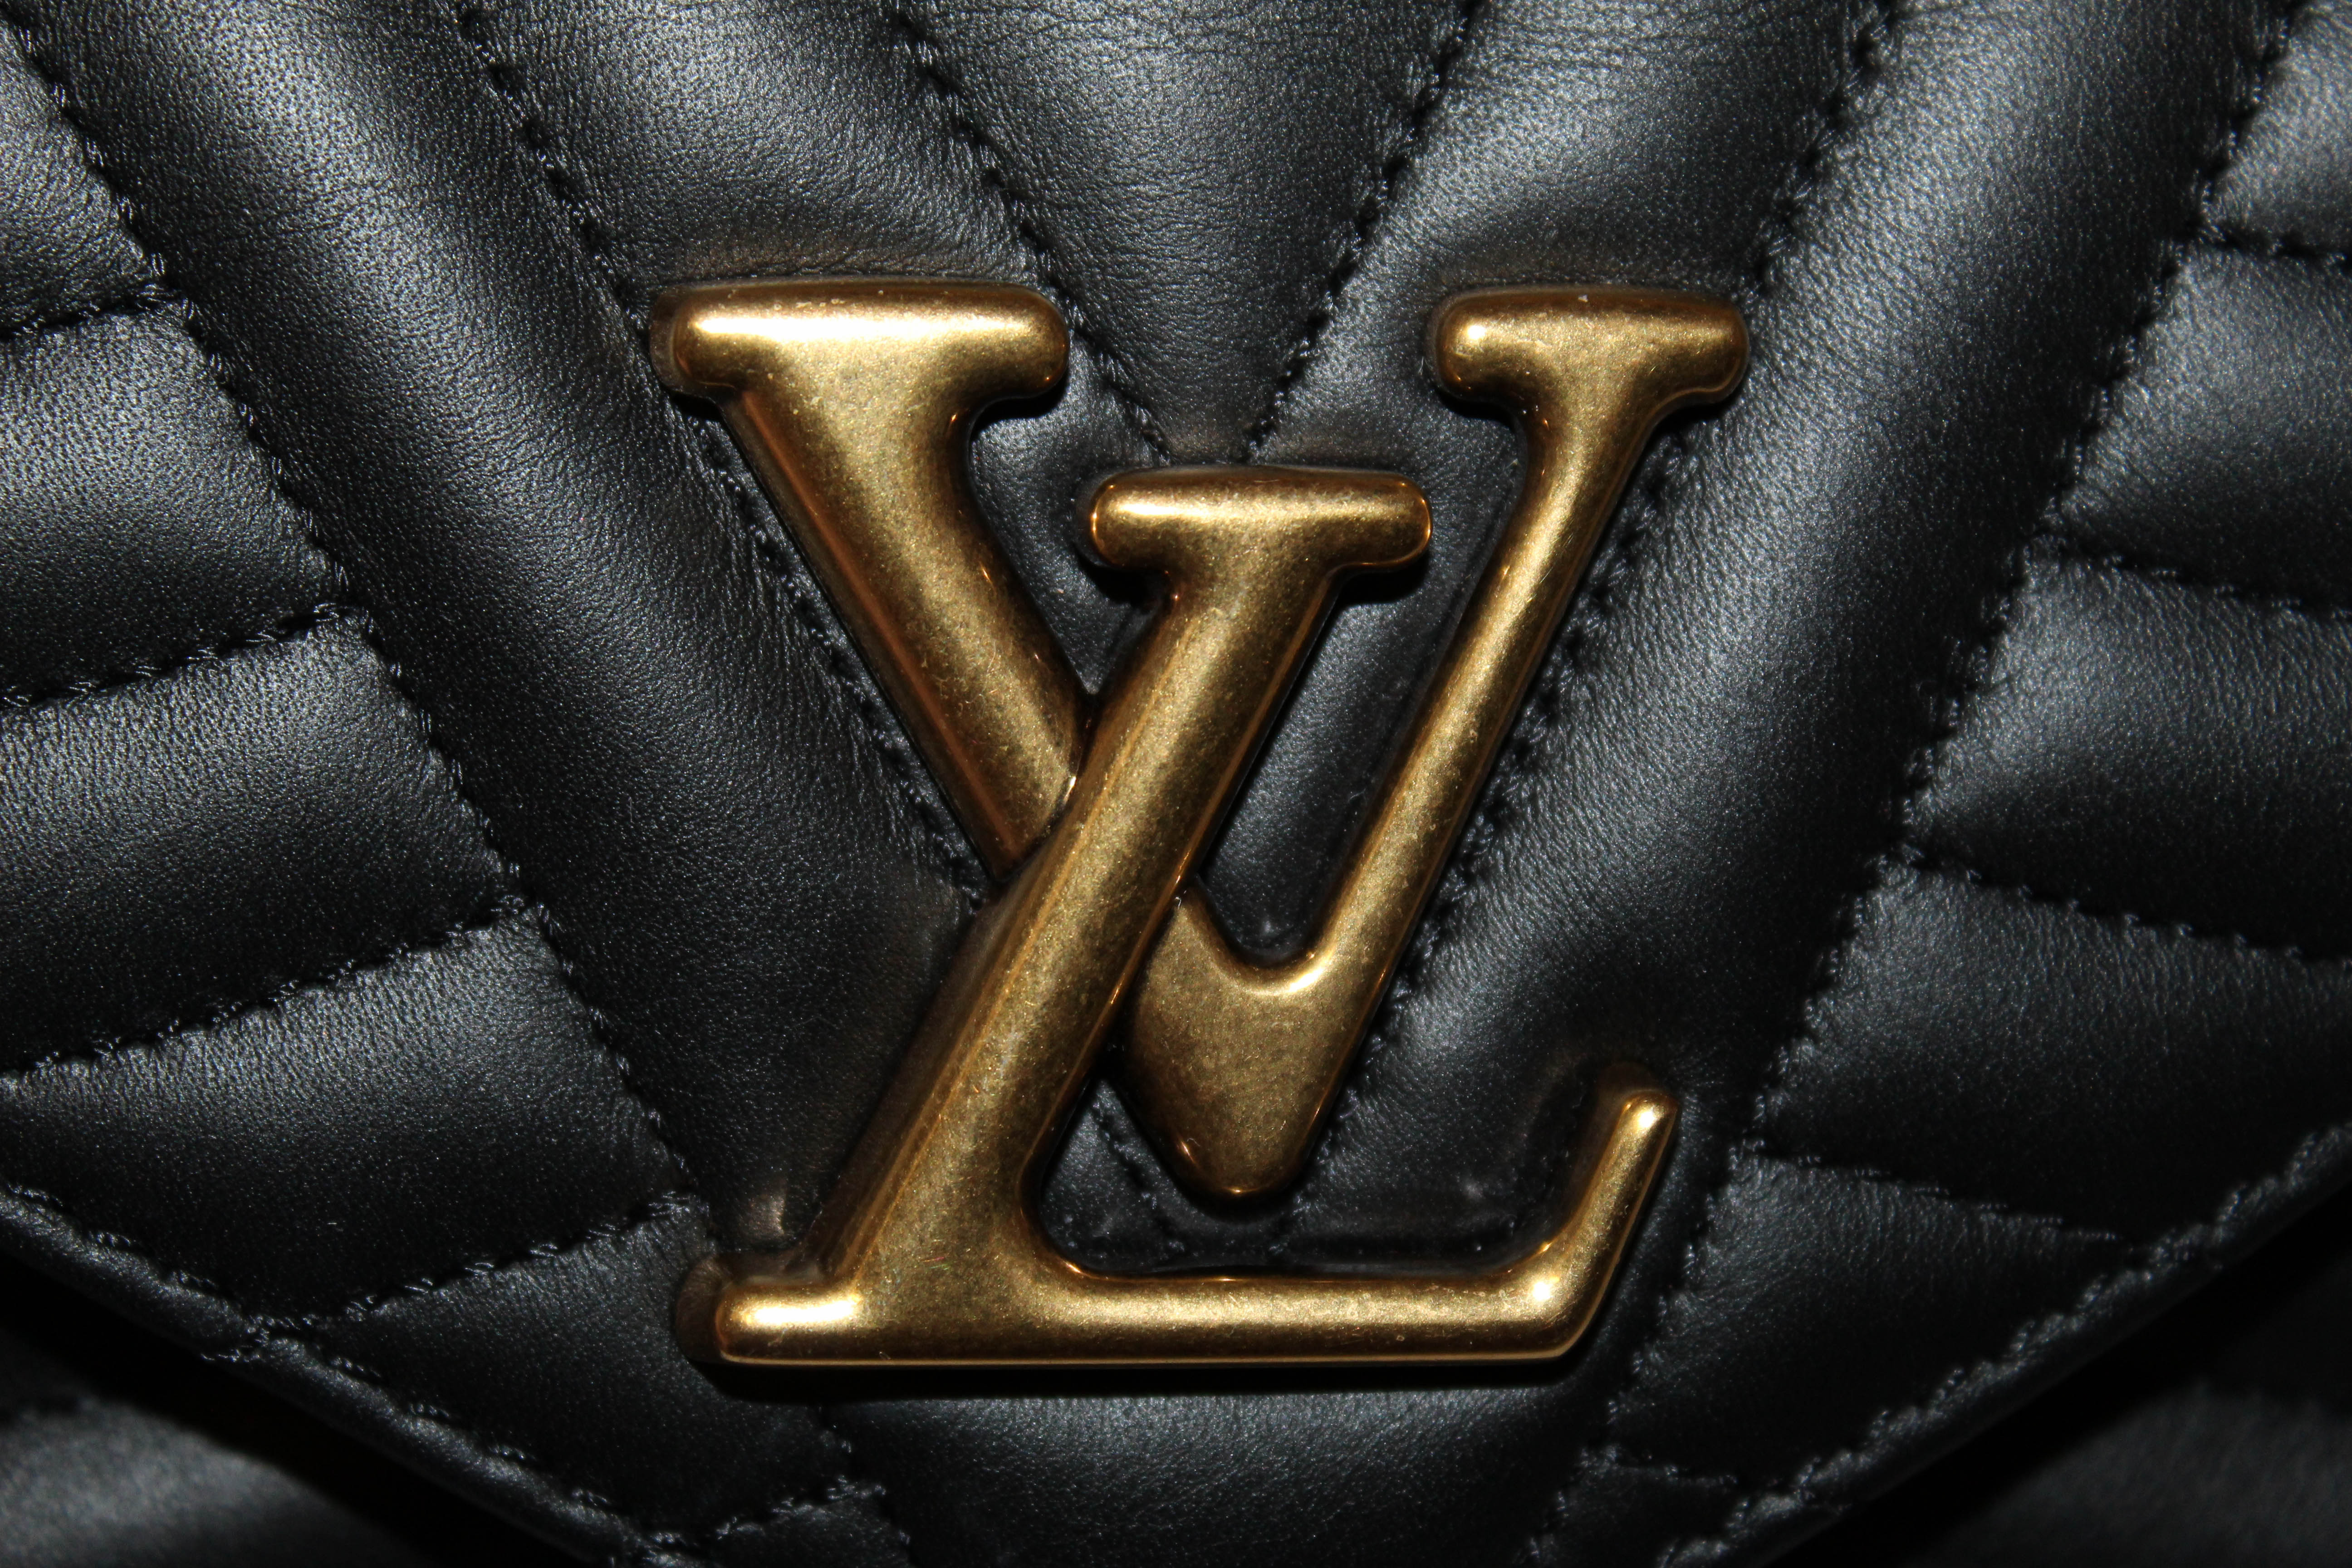 SOLD) genuine pre-owned Louis Vuitton new wave chain bag PM